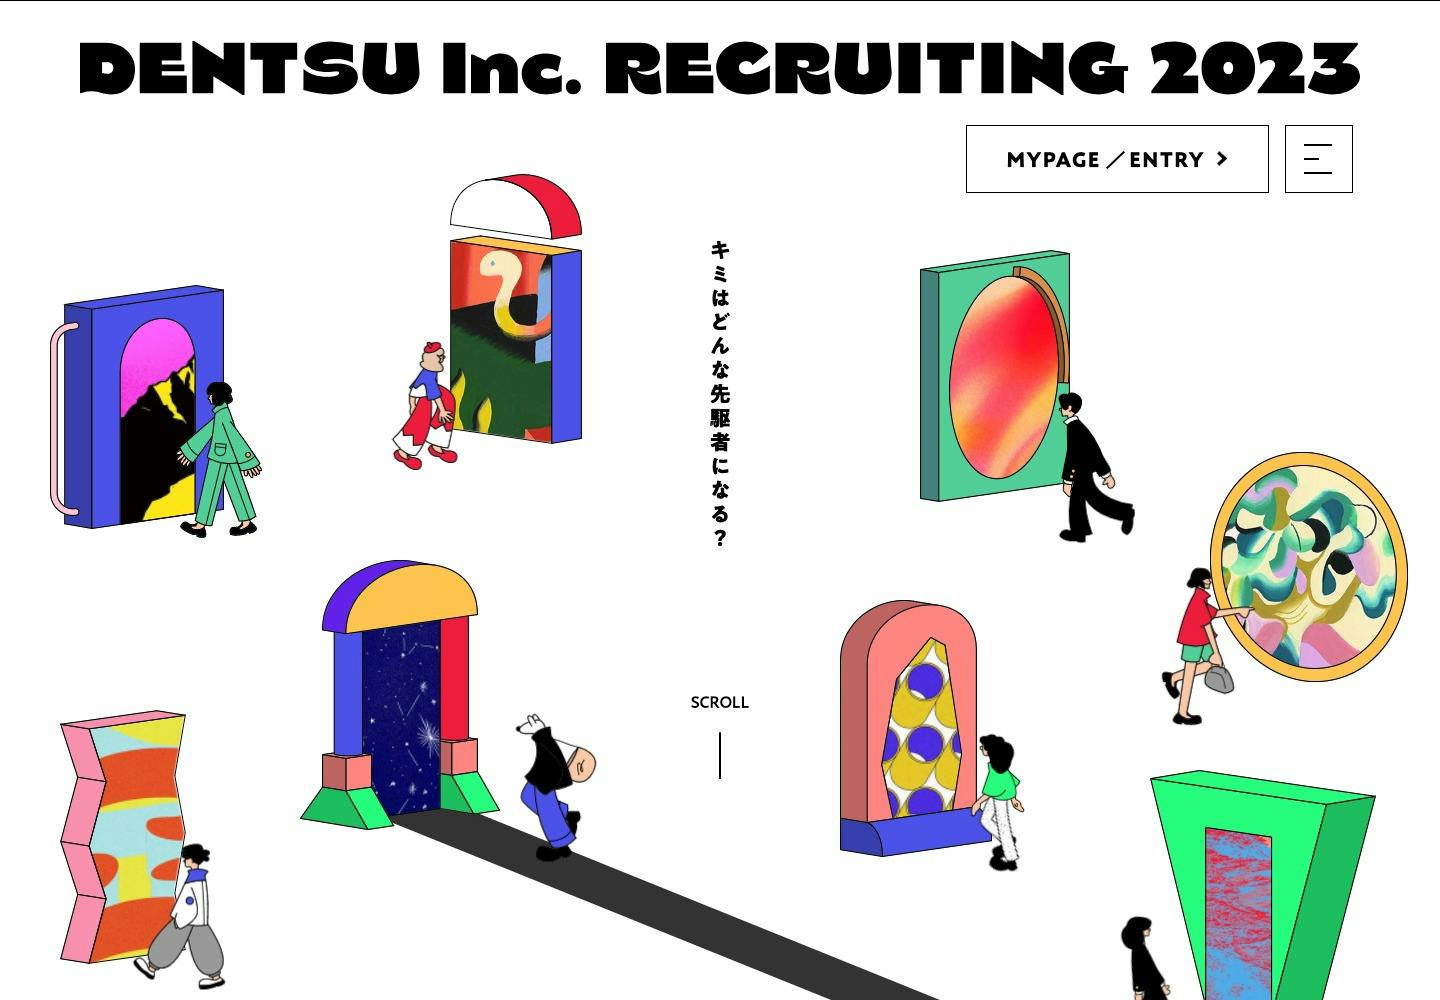 Cover Image for 電通　新卒採用サイト｜DENTSU INC. RECRUITING 2023